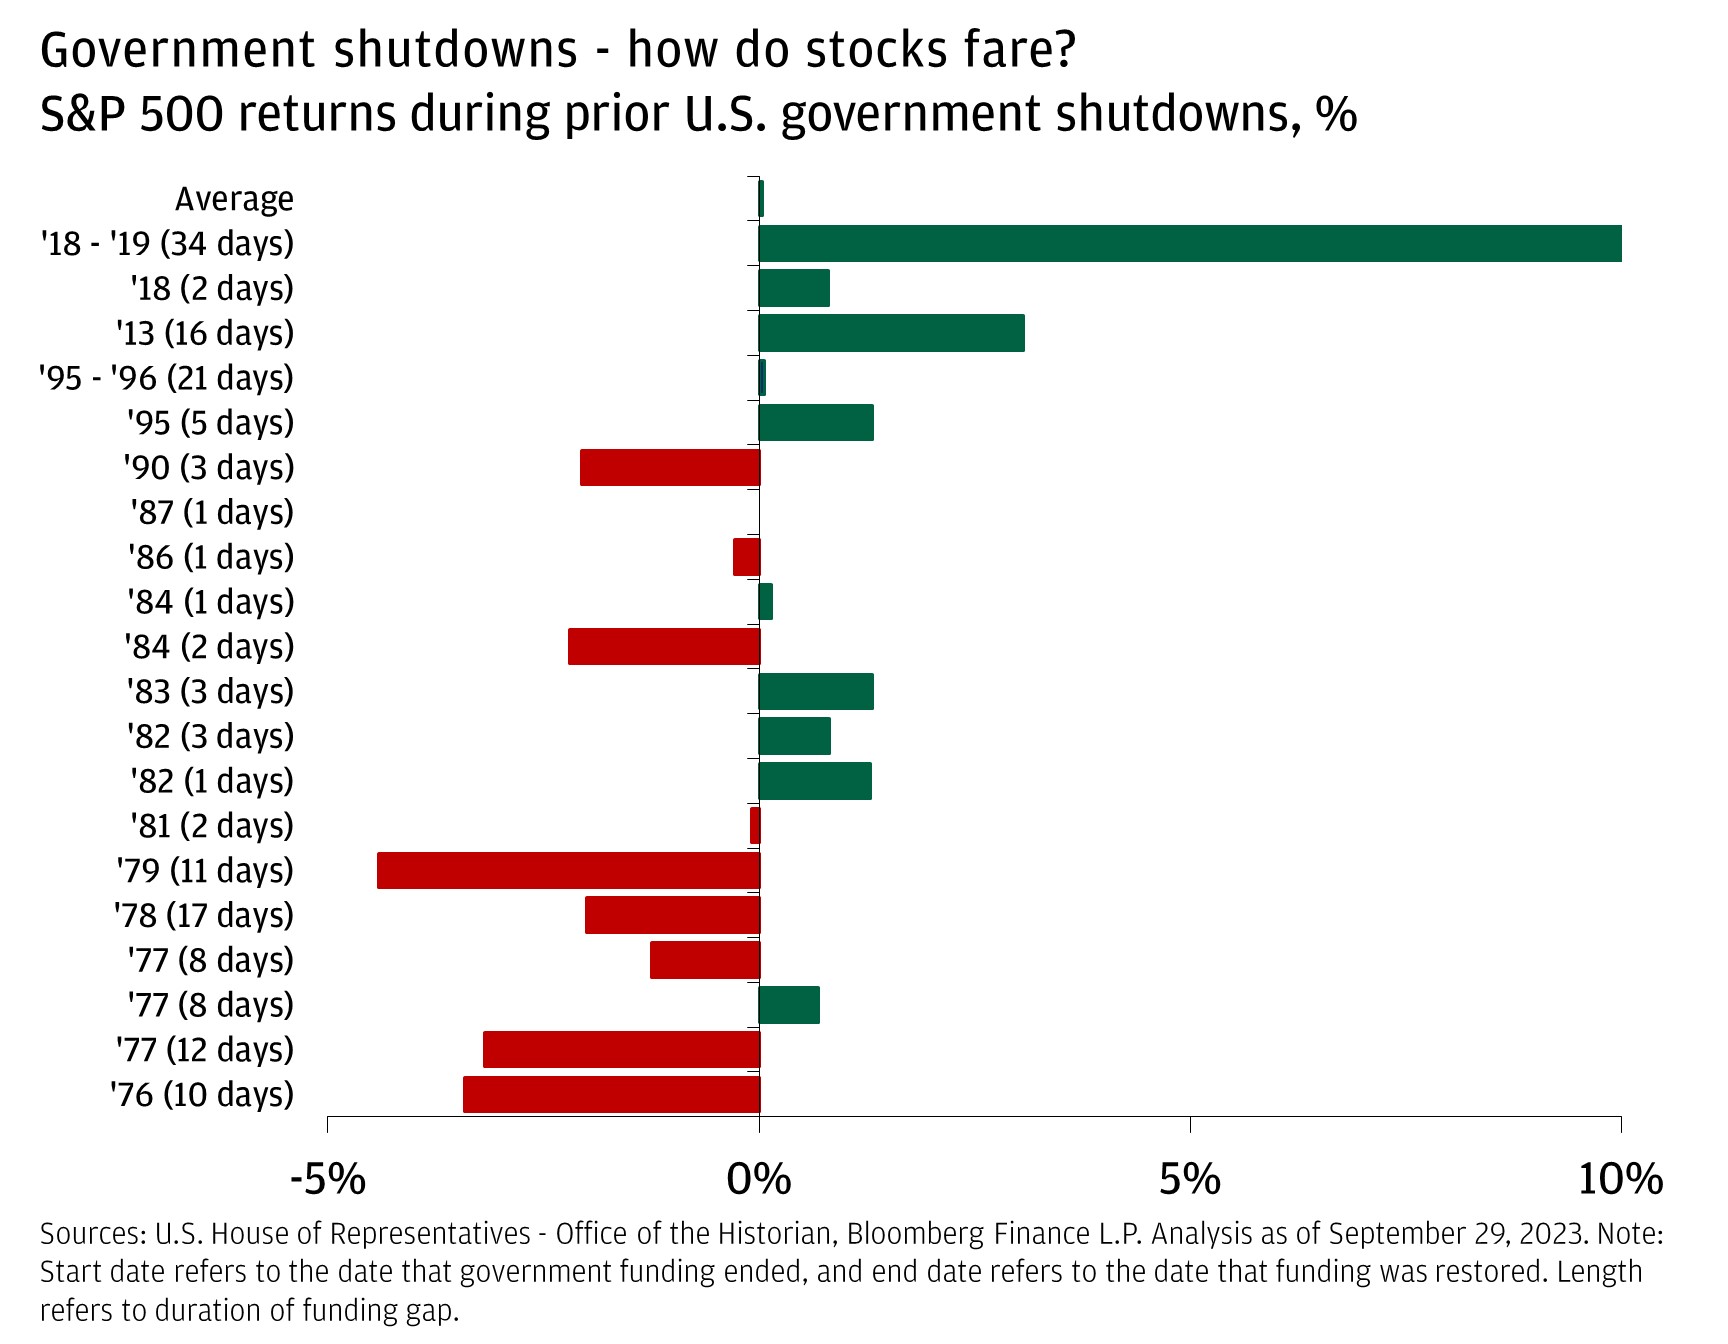 The chart describes S&P 500 returns during prior U.S. government shutdowns, %   '76 (10 days)	-3.4% '77 (12 days)	-3.2% '77 (8 days)	0.7% '77 (8 days)	-1.2% '78 (17 days)	-2.0% '79 (11 days)	-4.4% '81 (2 days)	-0.1% '82 (1 days)	1.3% '82 (3 days)	0.8% '83 (3 days)	1.3% '84 (2 days)	-2.2% '84 (1 days)	0.2% '86 (1 days)	-0.3% '87 (1 days)	0.0% '90 (3 days)	-2.1% '95 (5 days)	1.3% '95 - '96 (21 days)	0.1% '13 (16 days)	3.1% '18 (2 days)	0.8% '18 - '19 (34 days)	10.3% Average	0.0%